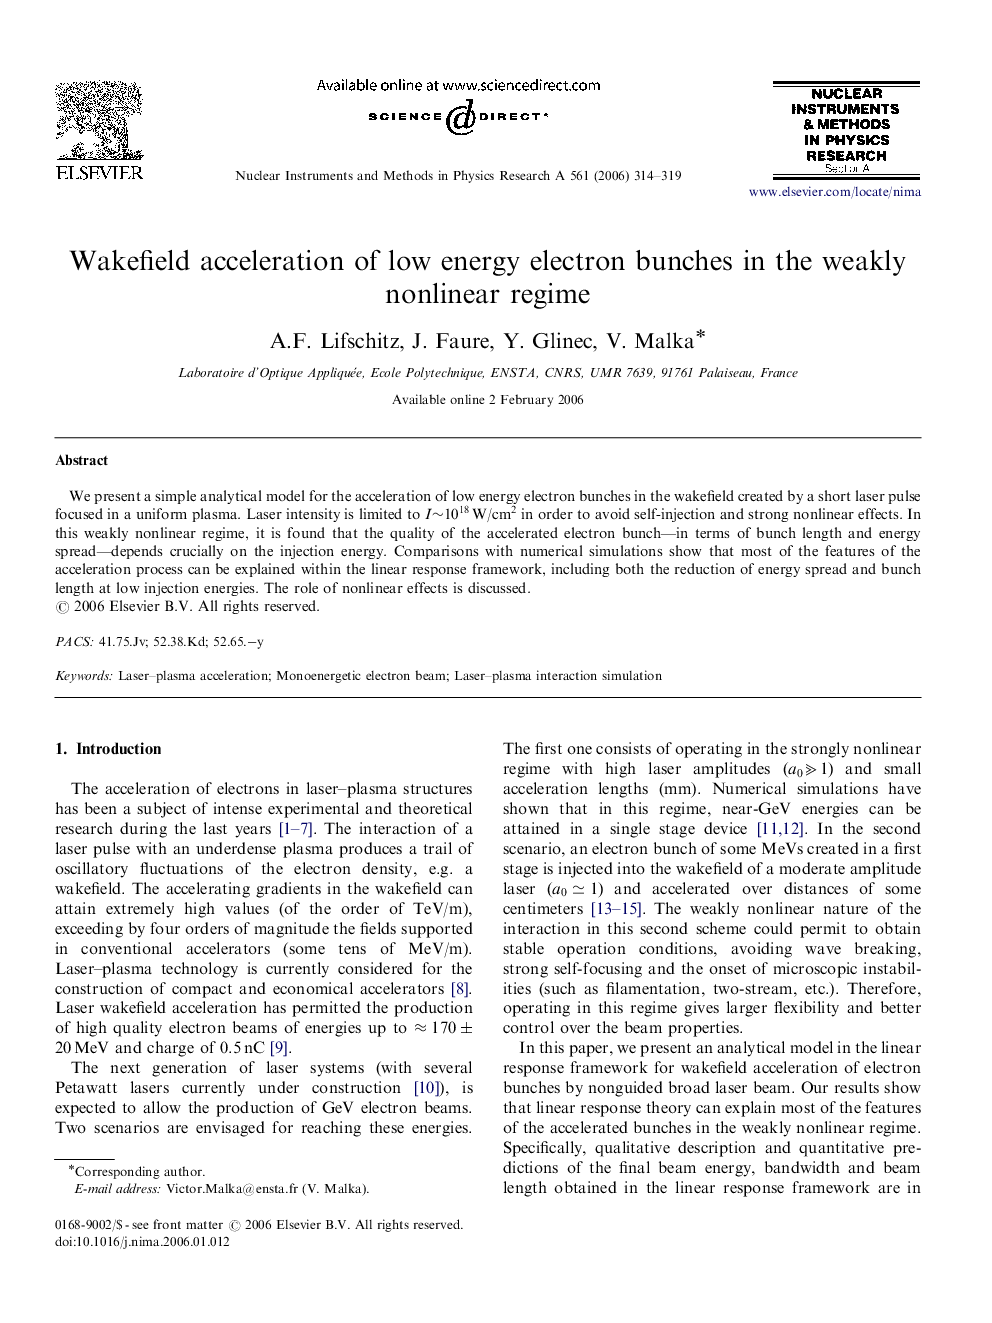 Wakefield acceleration of low energy electron bunches in the weakly nonlinear regime